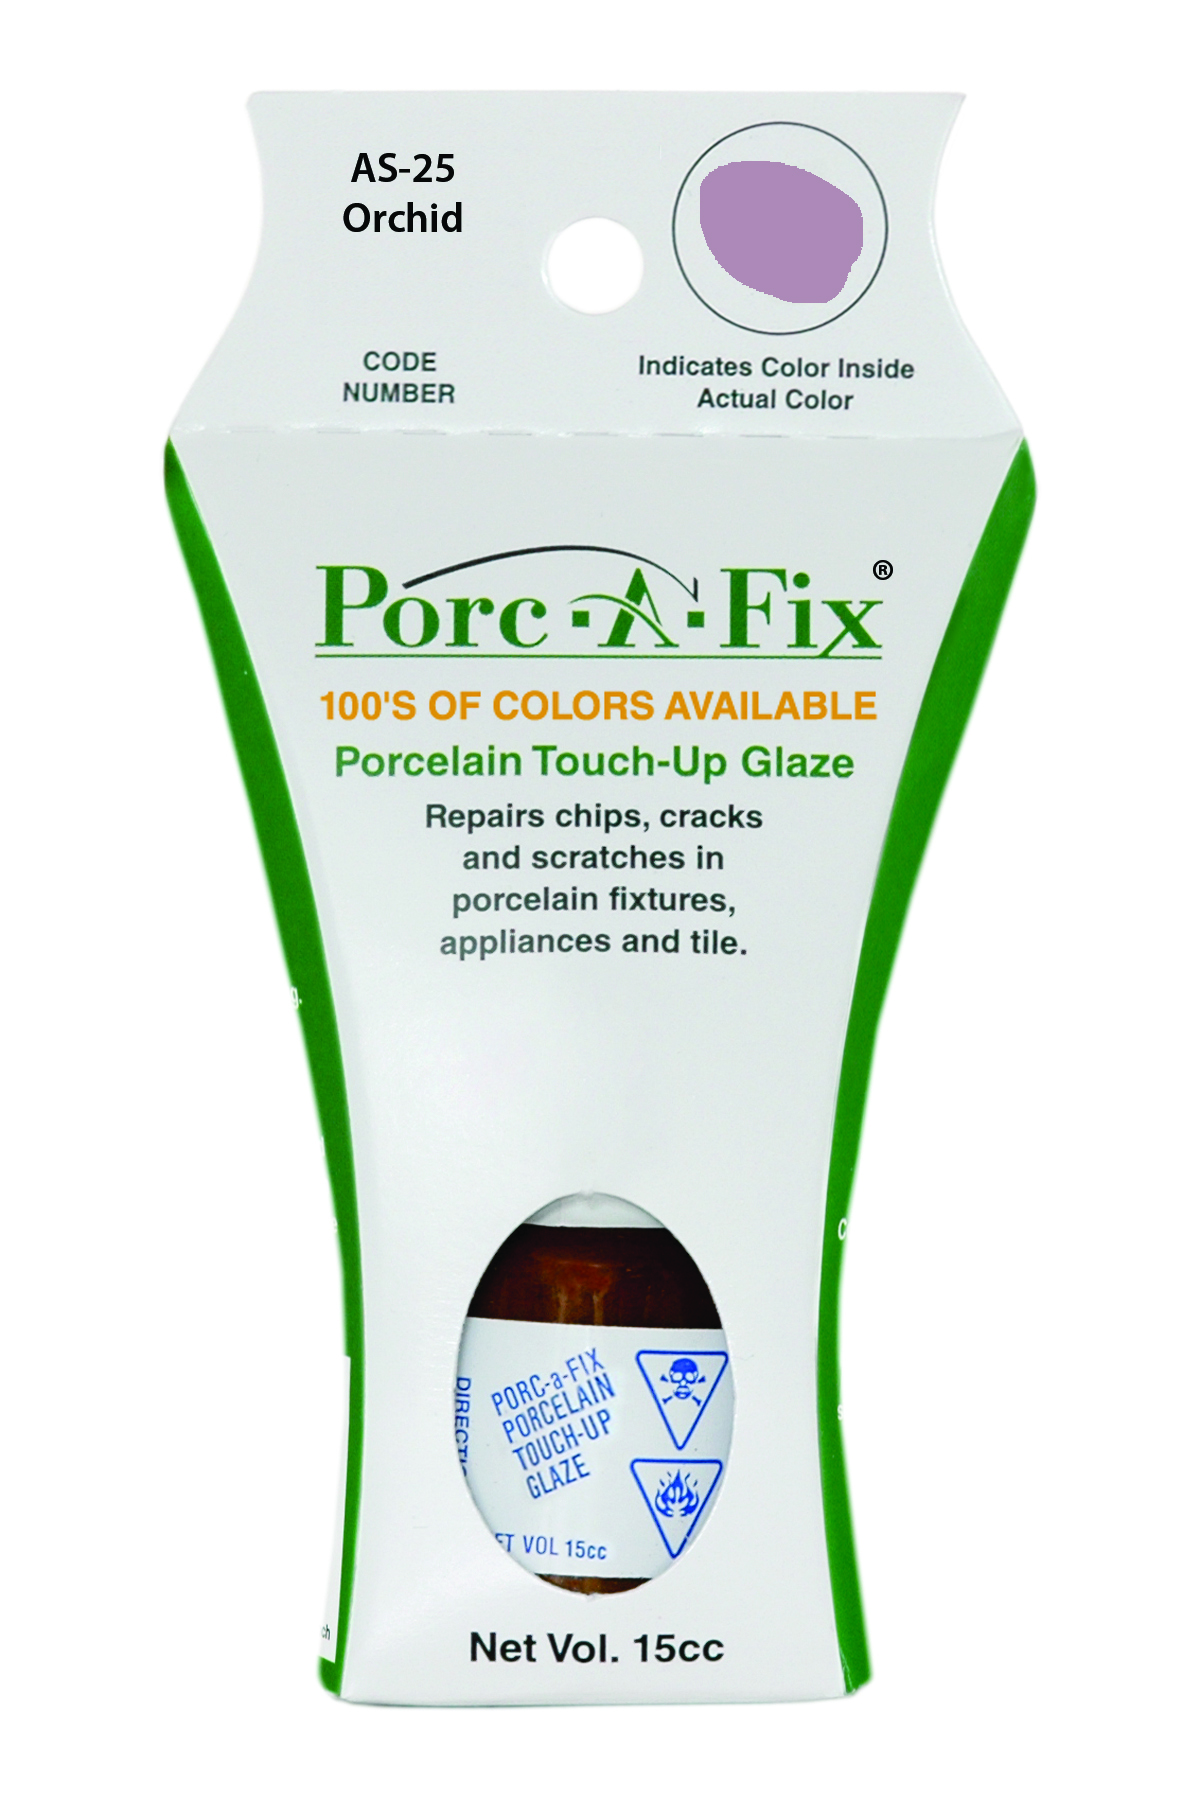 Fixture-Fix | AS-25 | Porc-A-Fix Touch-Up Glaze American Standard Orchid - Compatible with American Standard 070900-1790A Touch Up Paint Kit - ORCHID